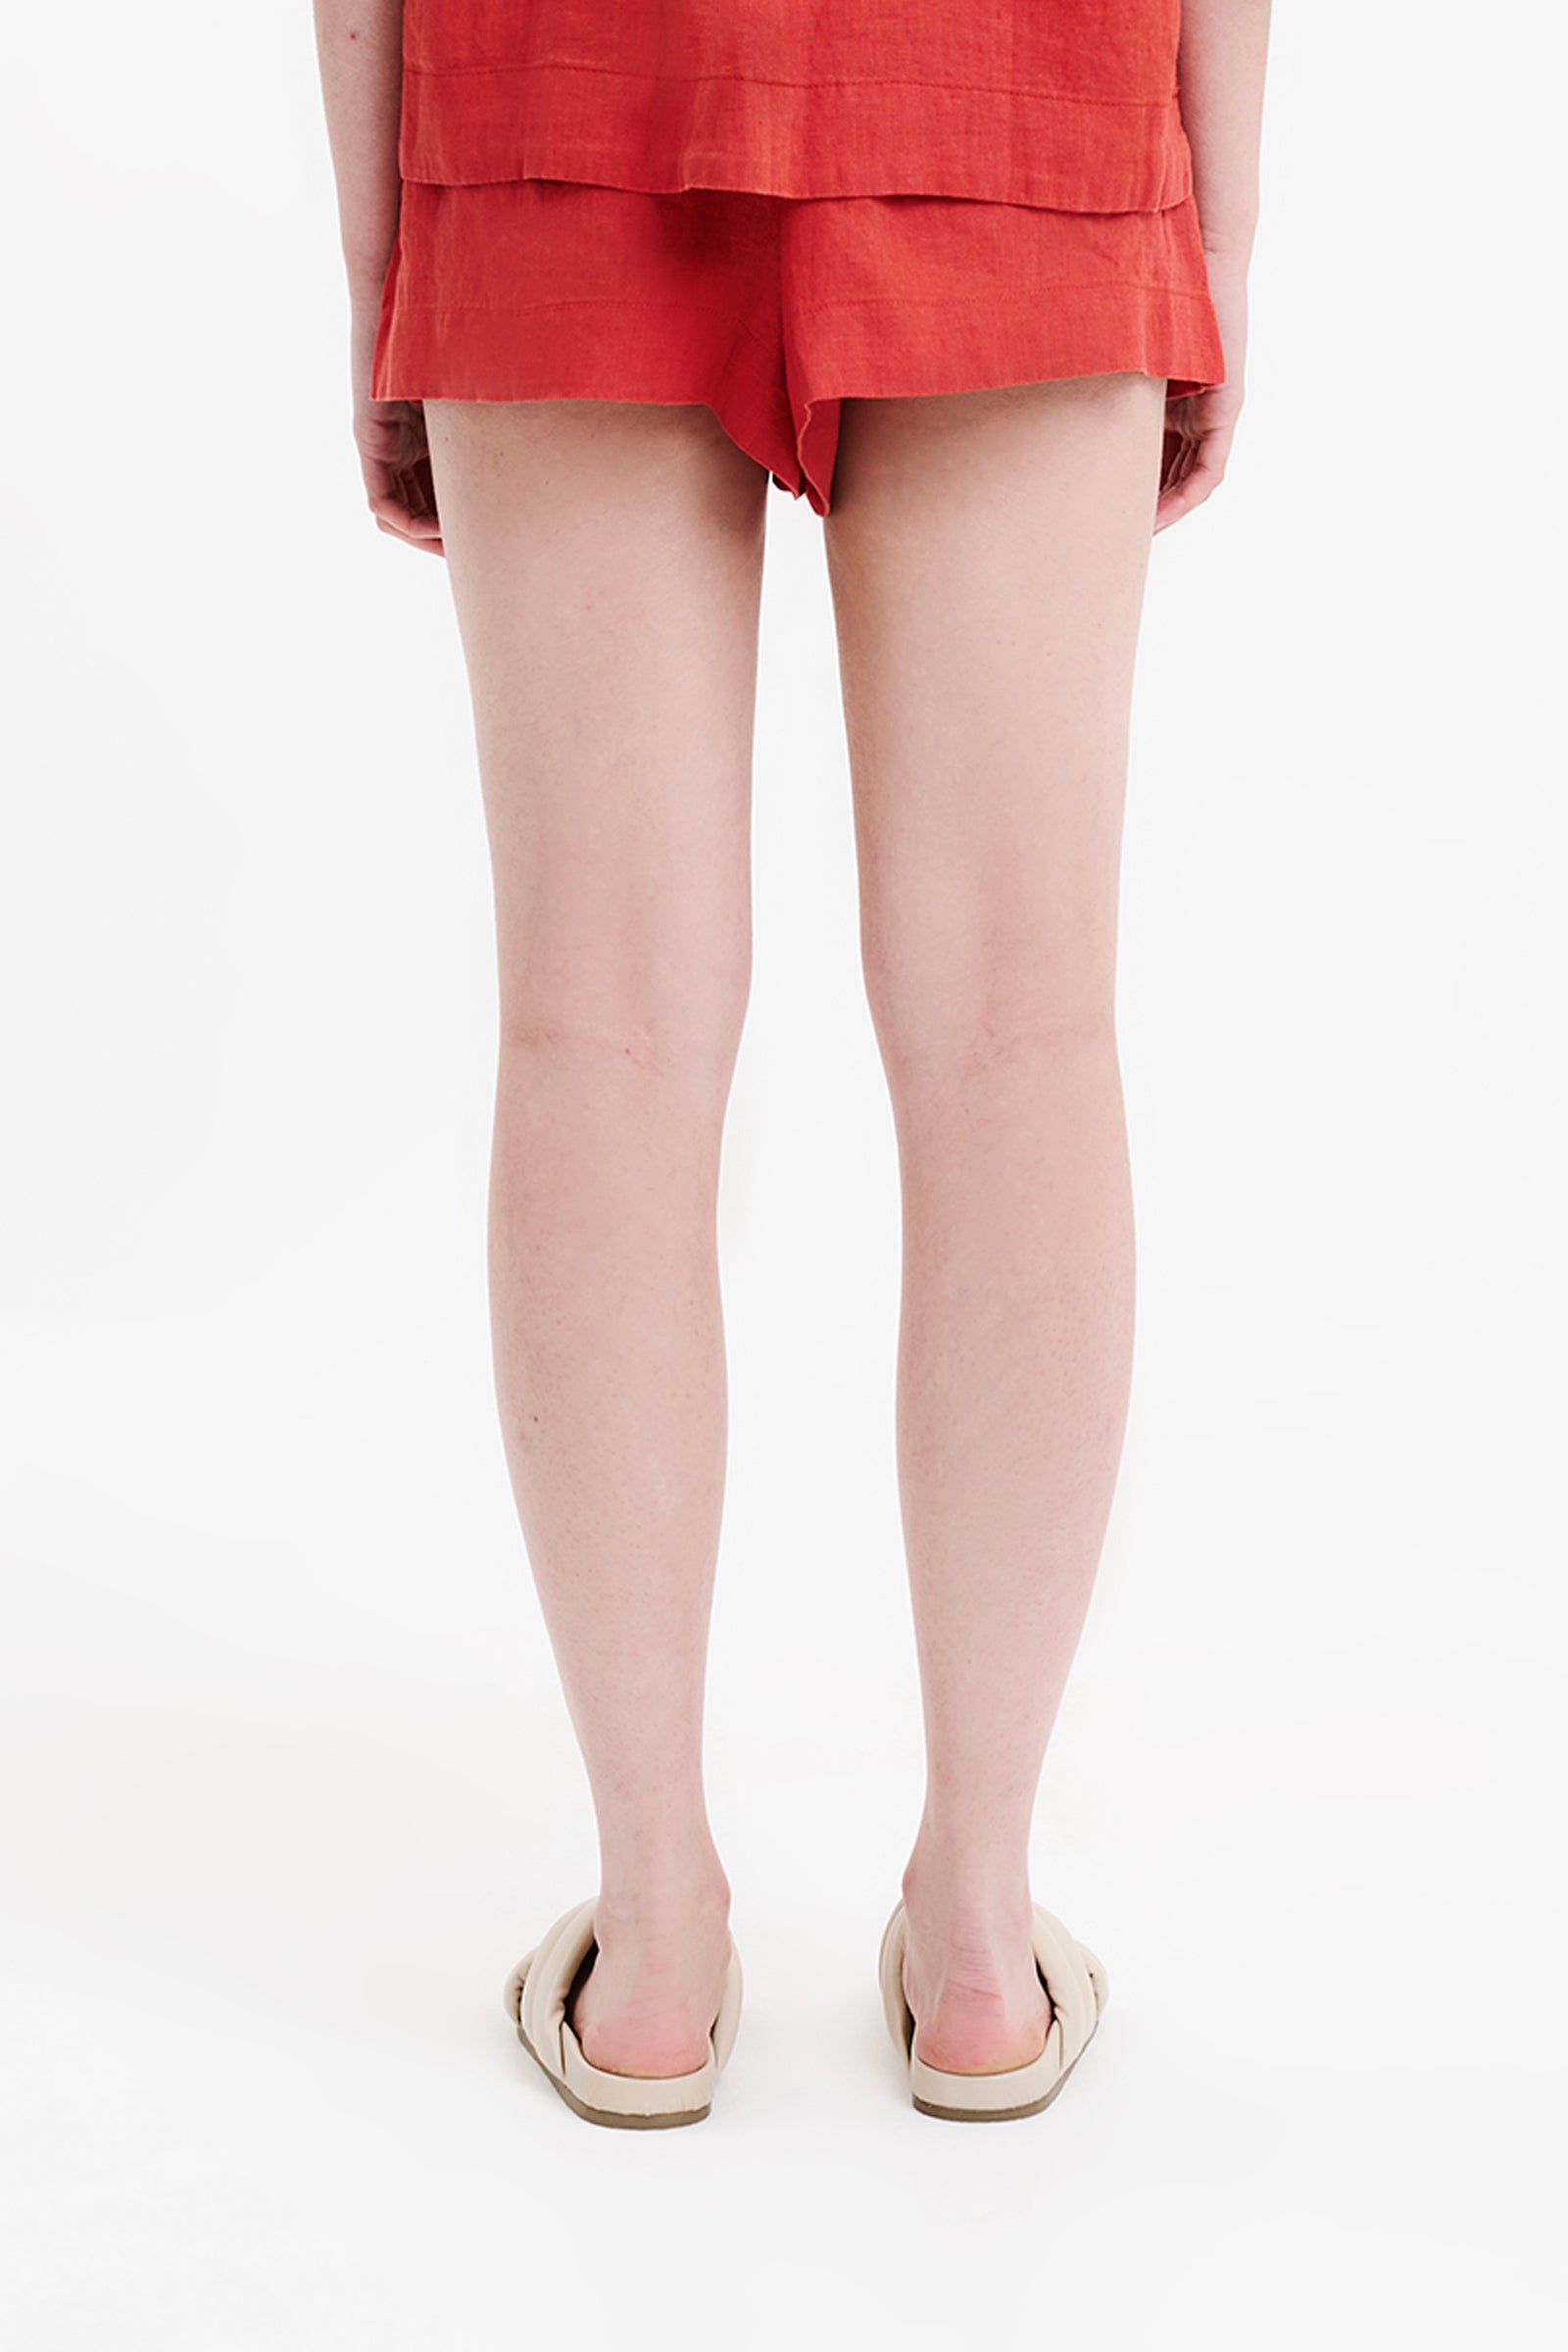 Nude Lucy Lounge Linen Short In A Pink & Orange Toned Coral Colour 